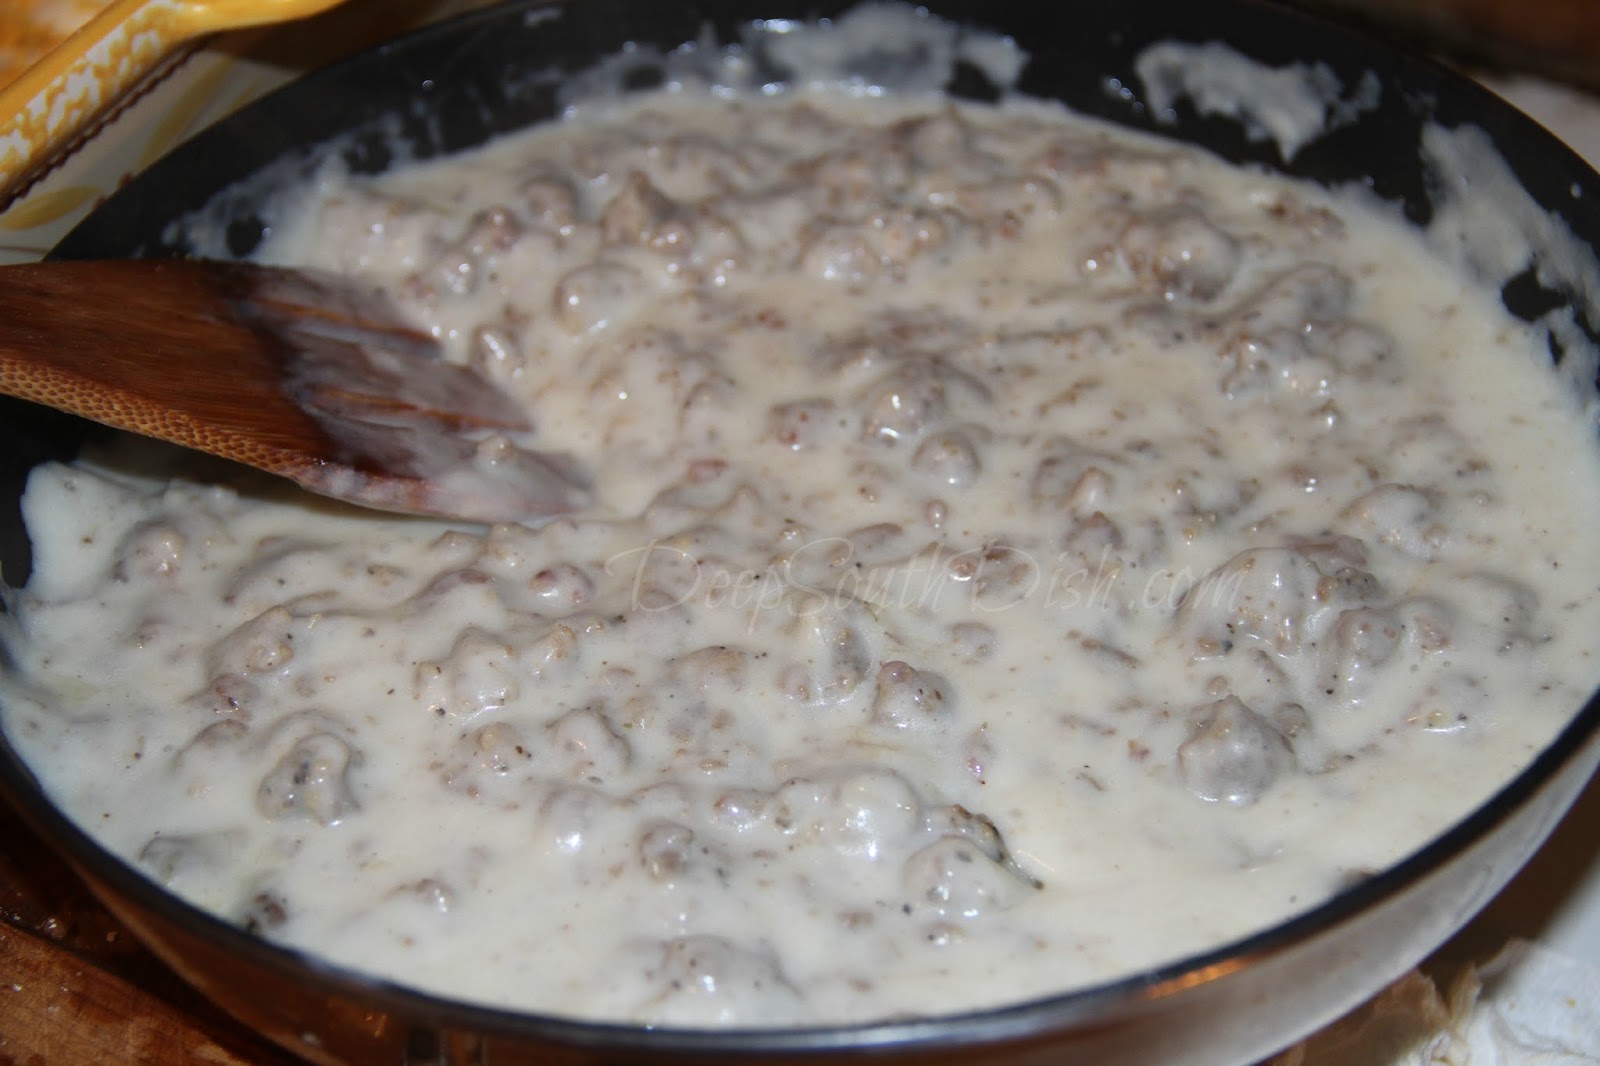 What is a popular recipe for homemade white gravy?